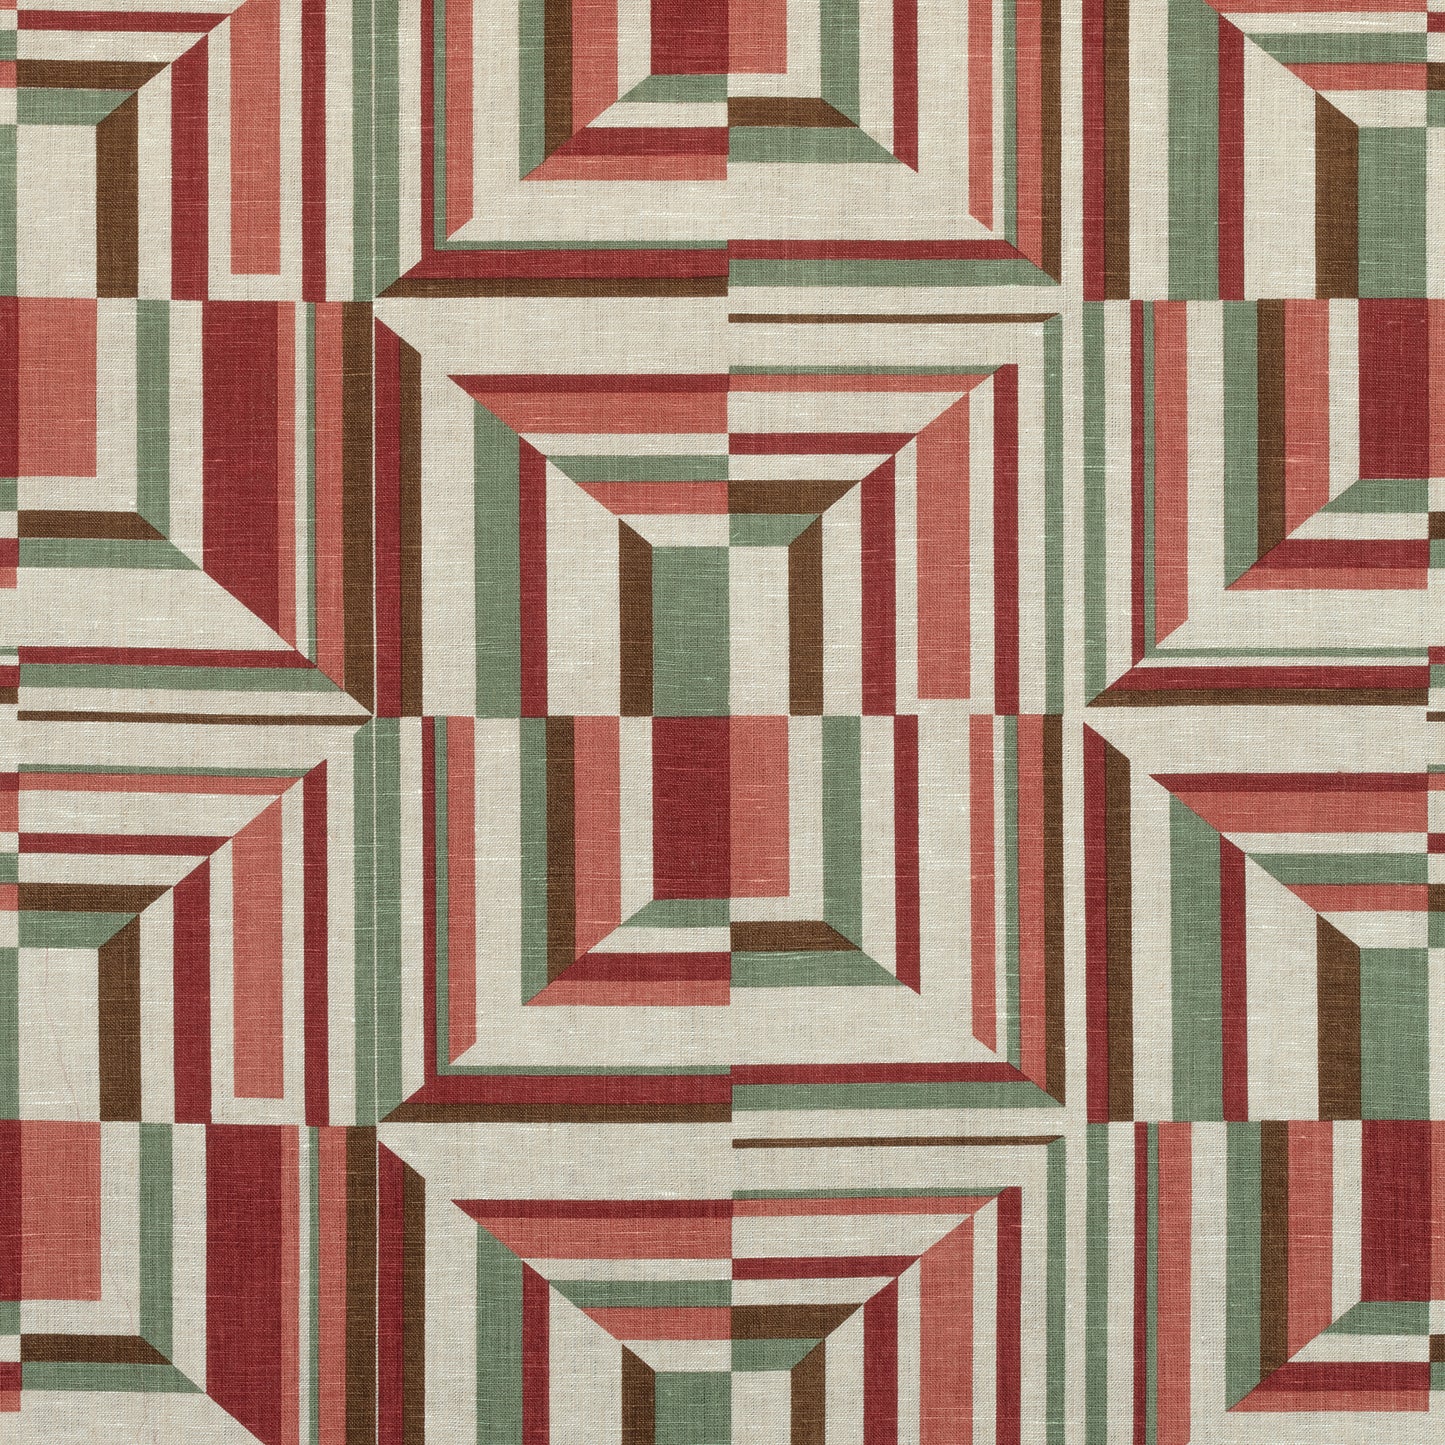 Purchase  Ann French Fabric Product# AF9650  pattern name  Cubism